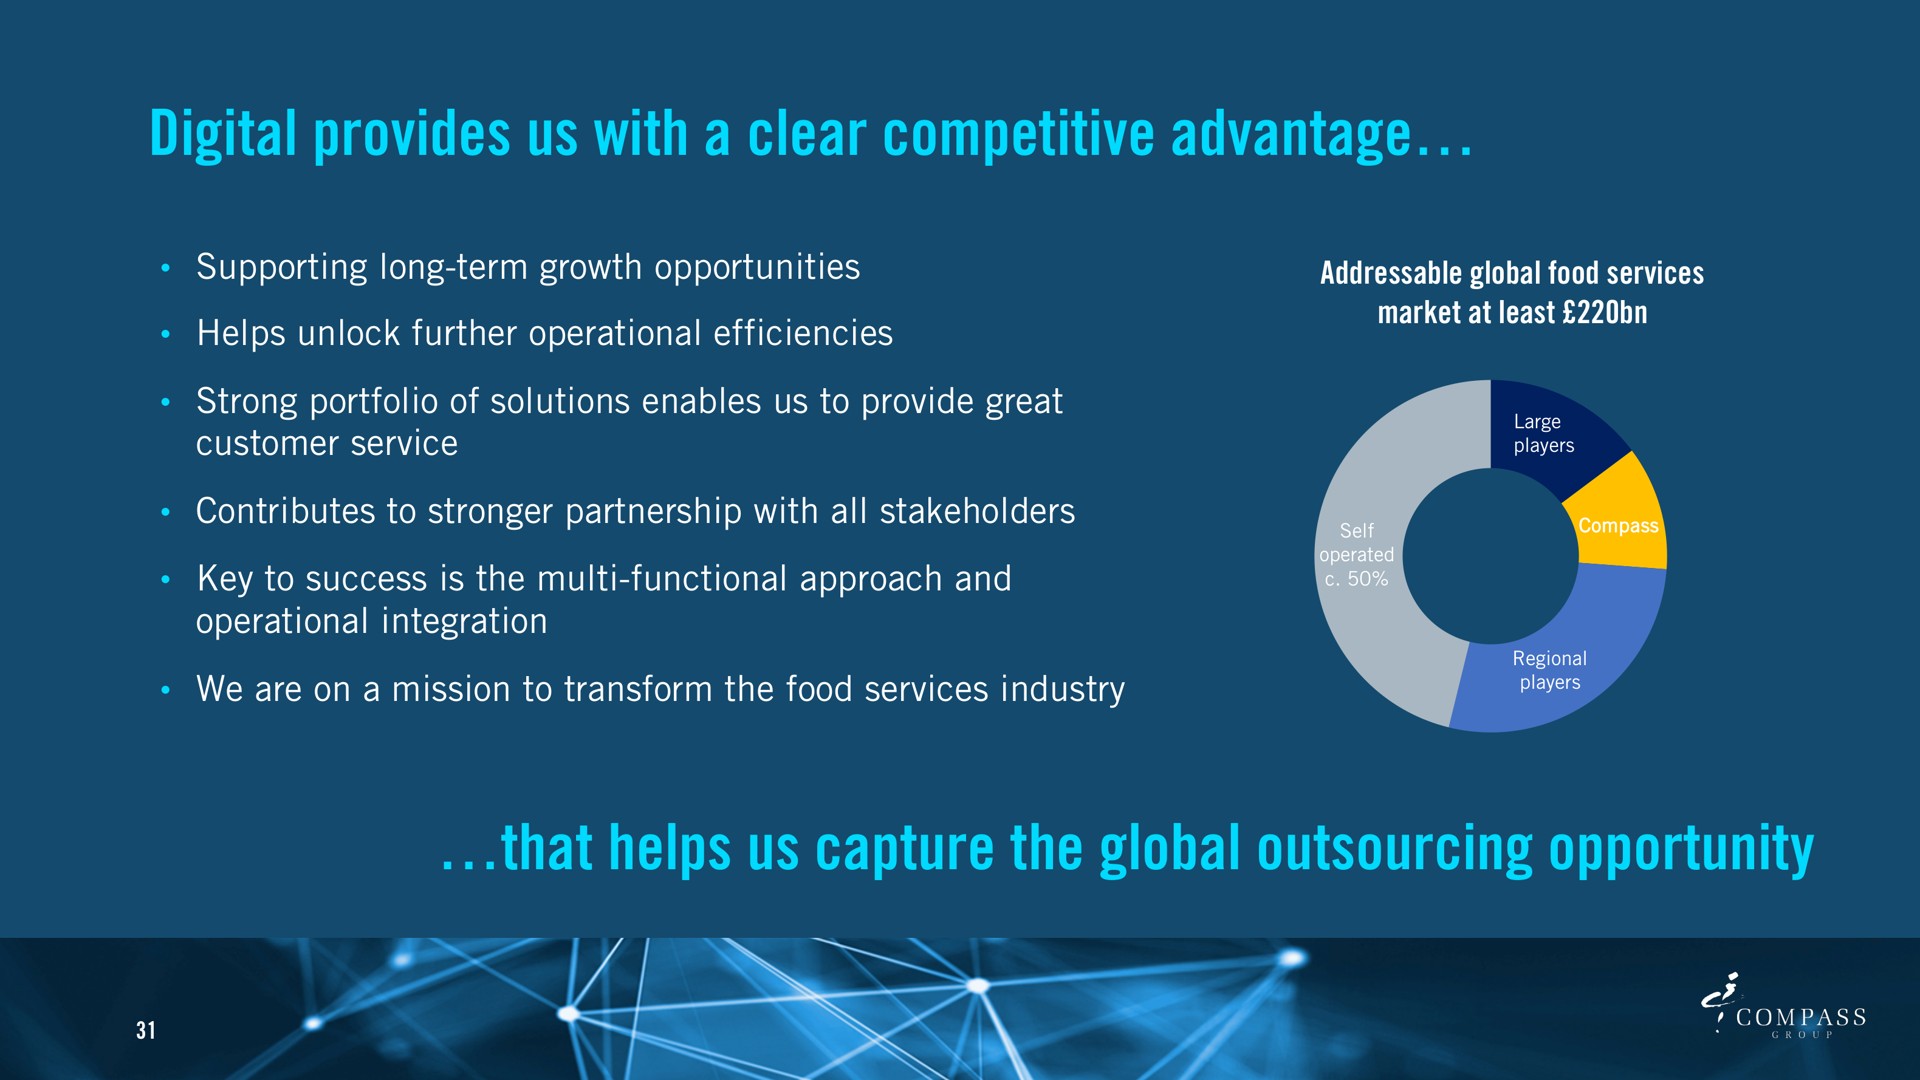 digital provides us with a clear competitive advantage that helps us capture the global opportunity | Compass Group